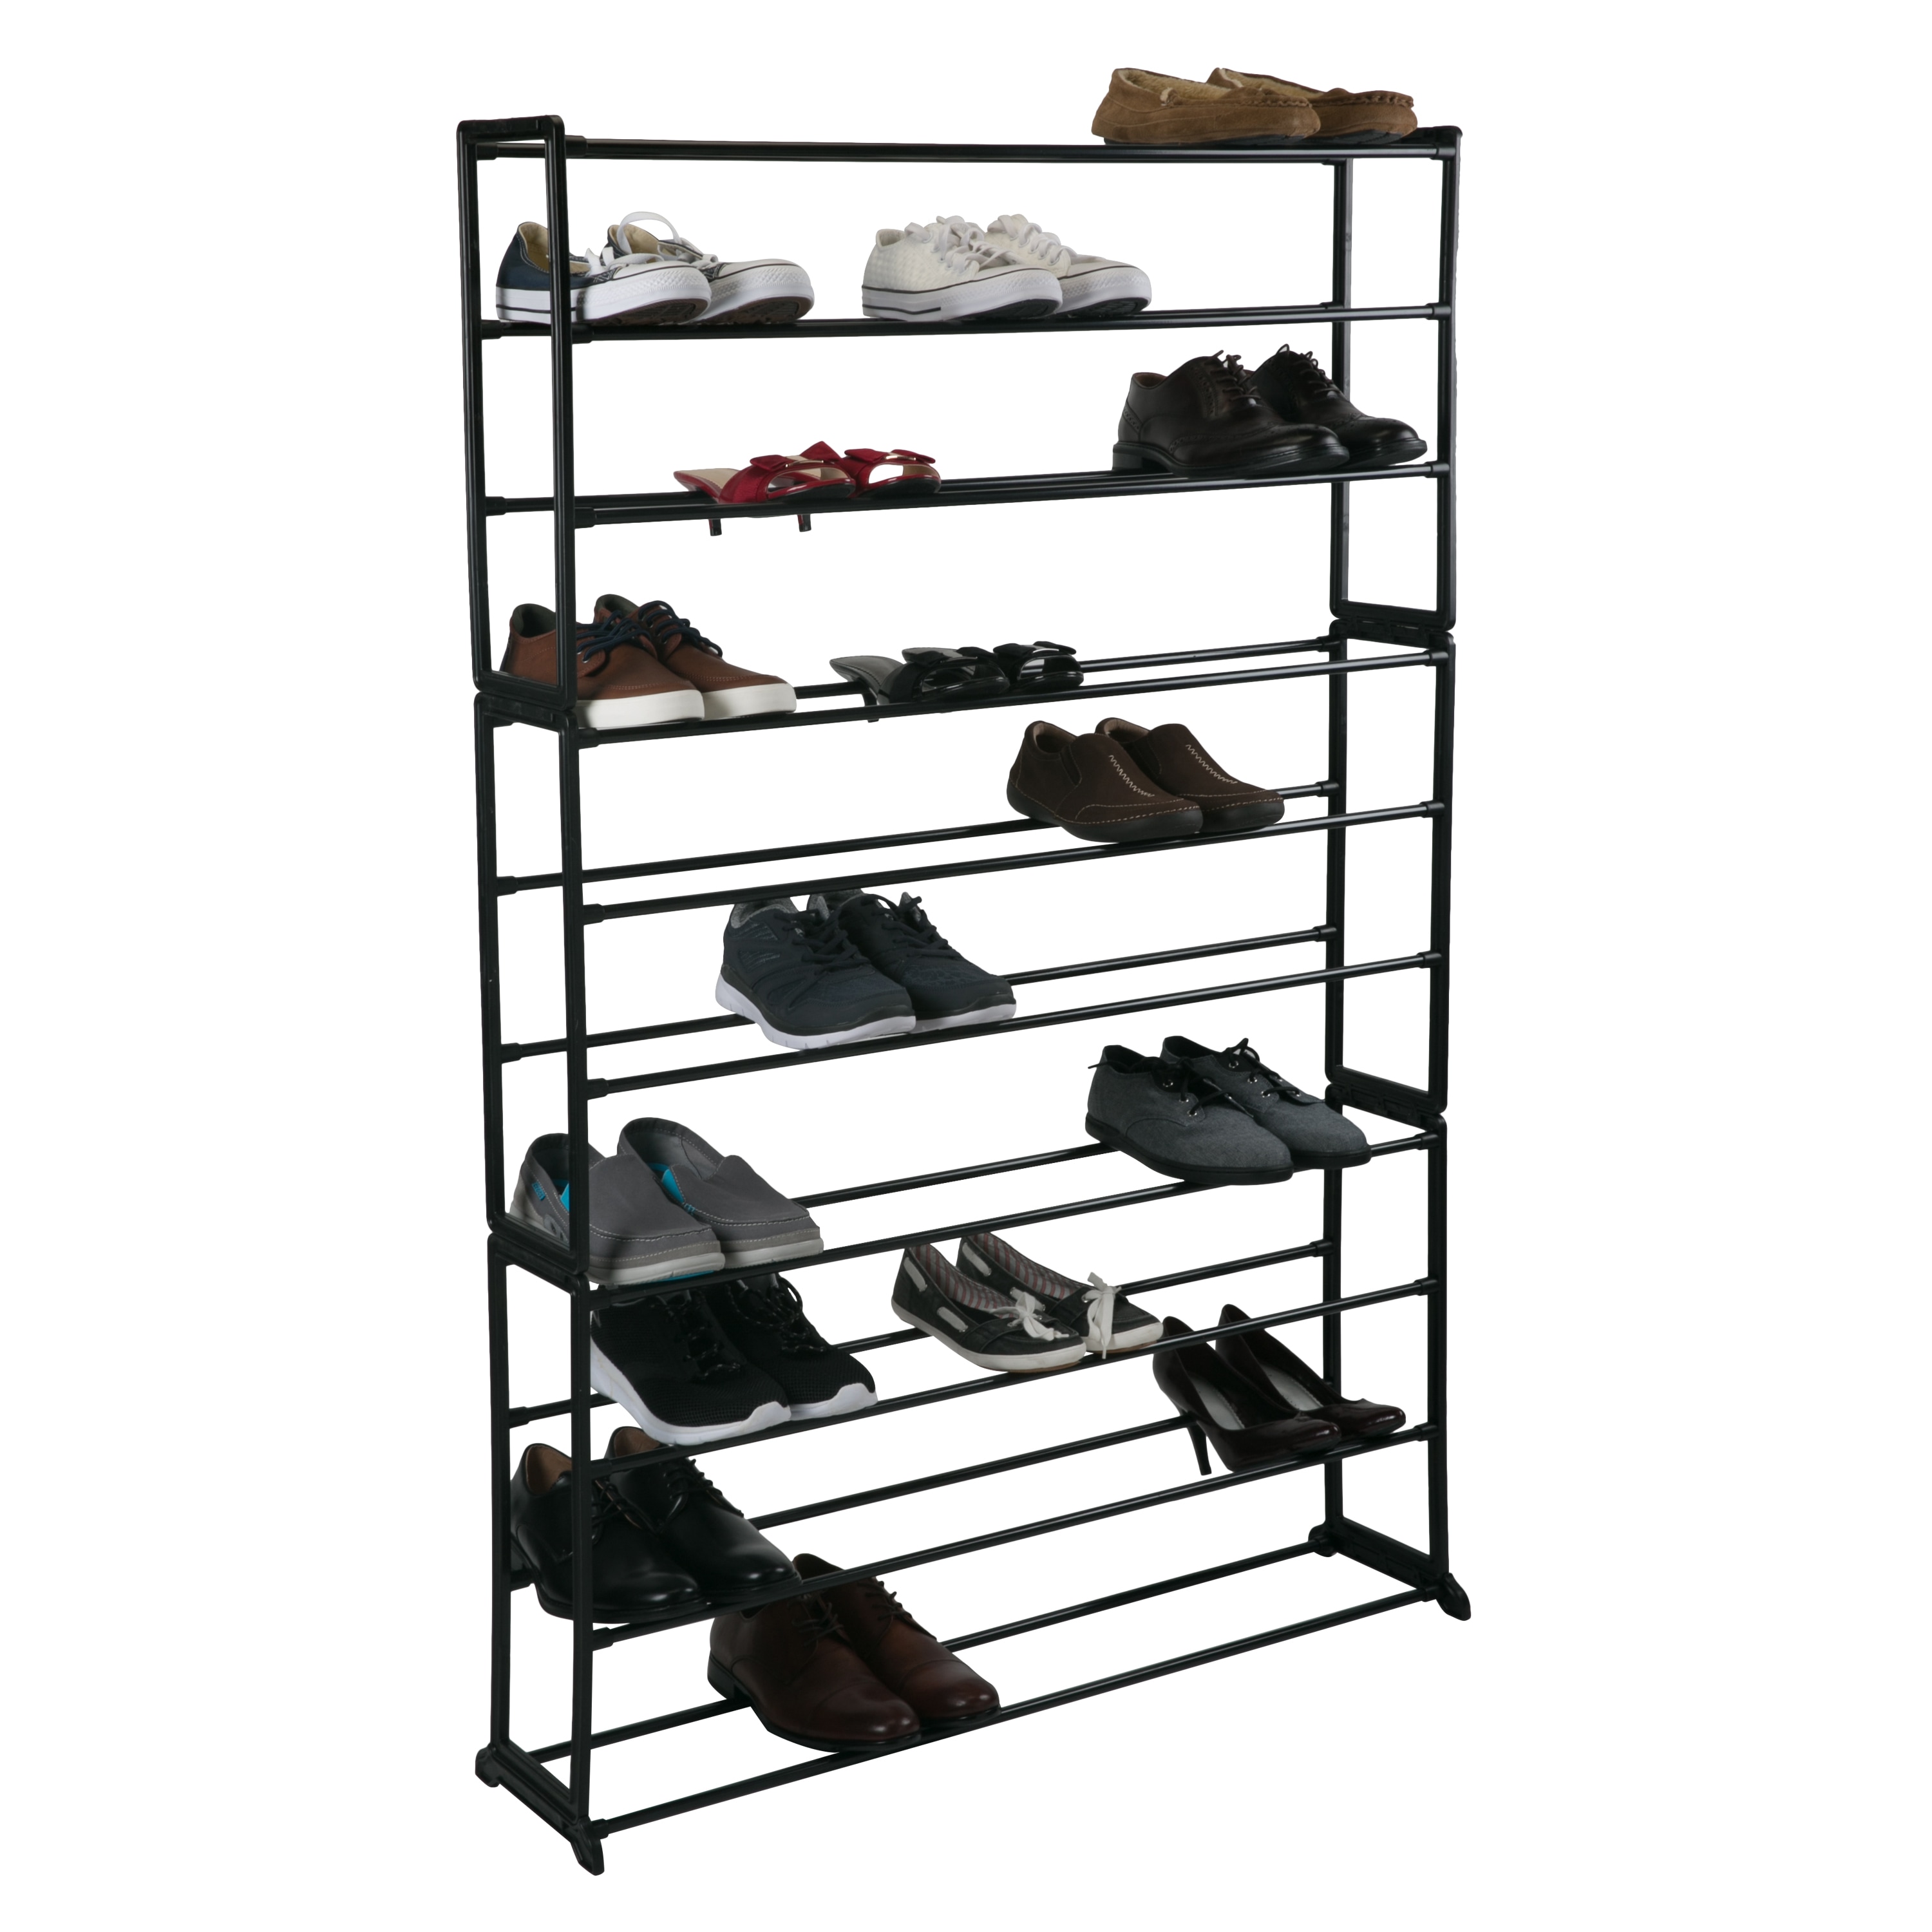 Simplify Grey Metal Shoe Rack, 10 Tier Shoe Storage Organizer, Holds 50  Pairs of Shoes, Freestanding Shoe Shelf, 59.5-in H x 36.6-in W x 11.8-in D  in the Shoe Storage department at